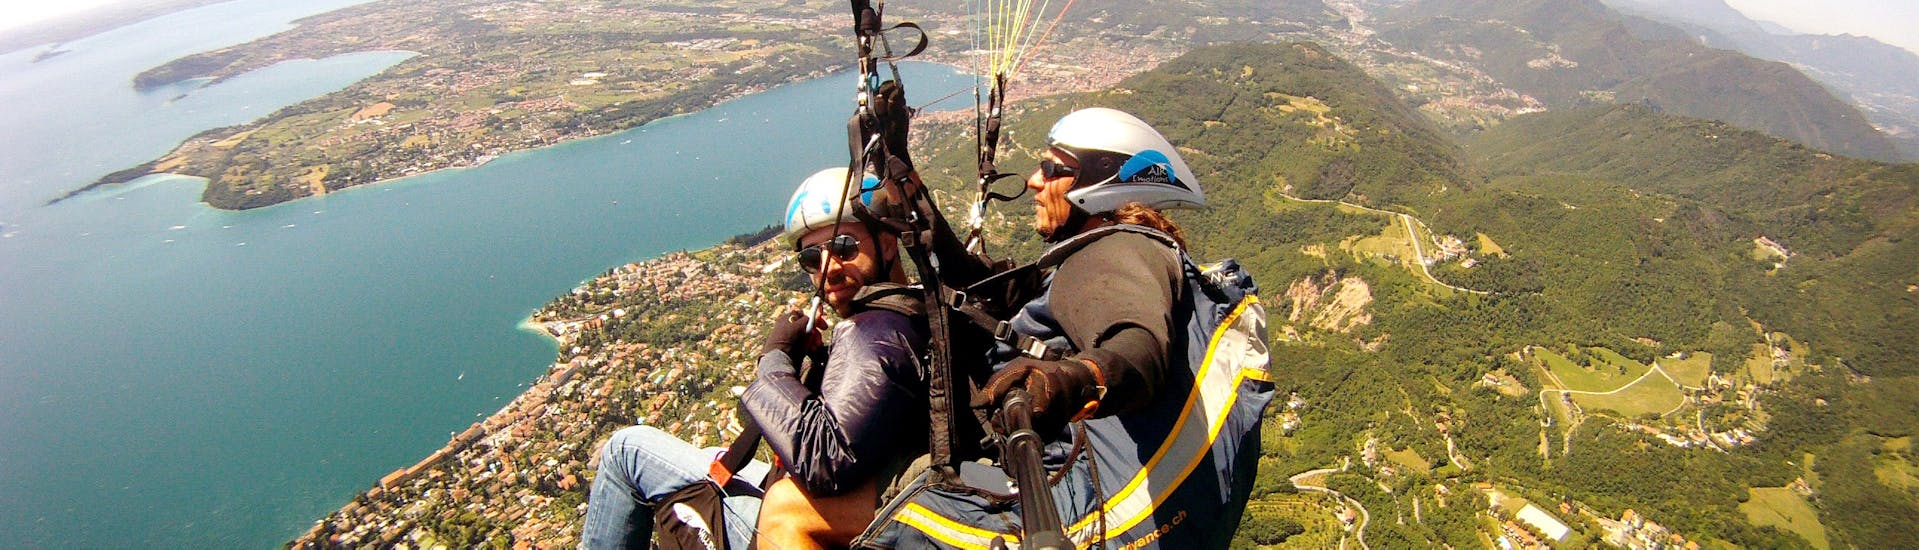 Tandem Paragliding über den Lecco See in Bergamo mit Air Emotions Lombardia.